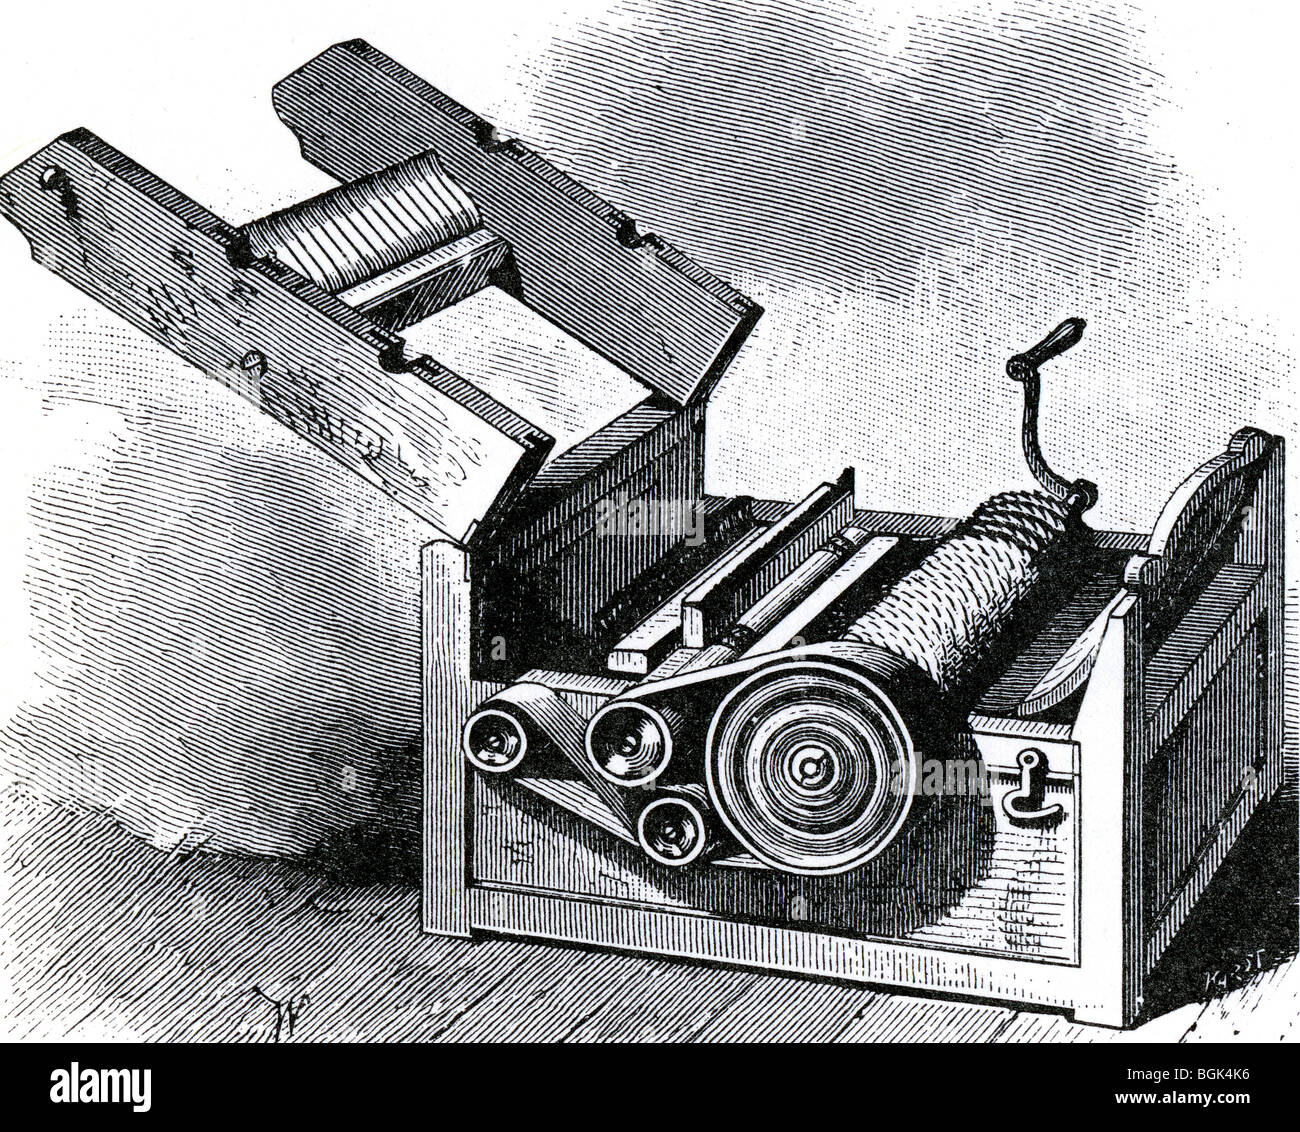 ELI WHITNEY'S COTTON GIN  invented in 1793 - see Description below for details. This is an early 19th century version. Stock Photo